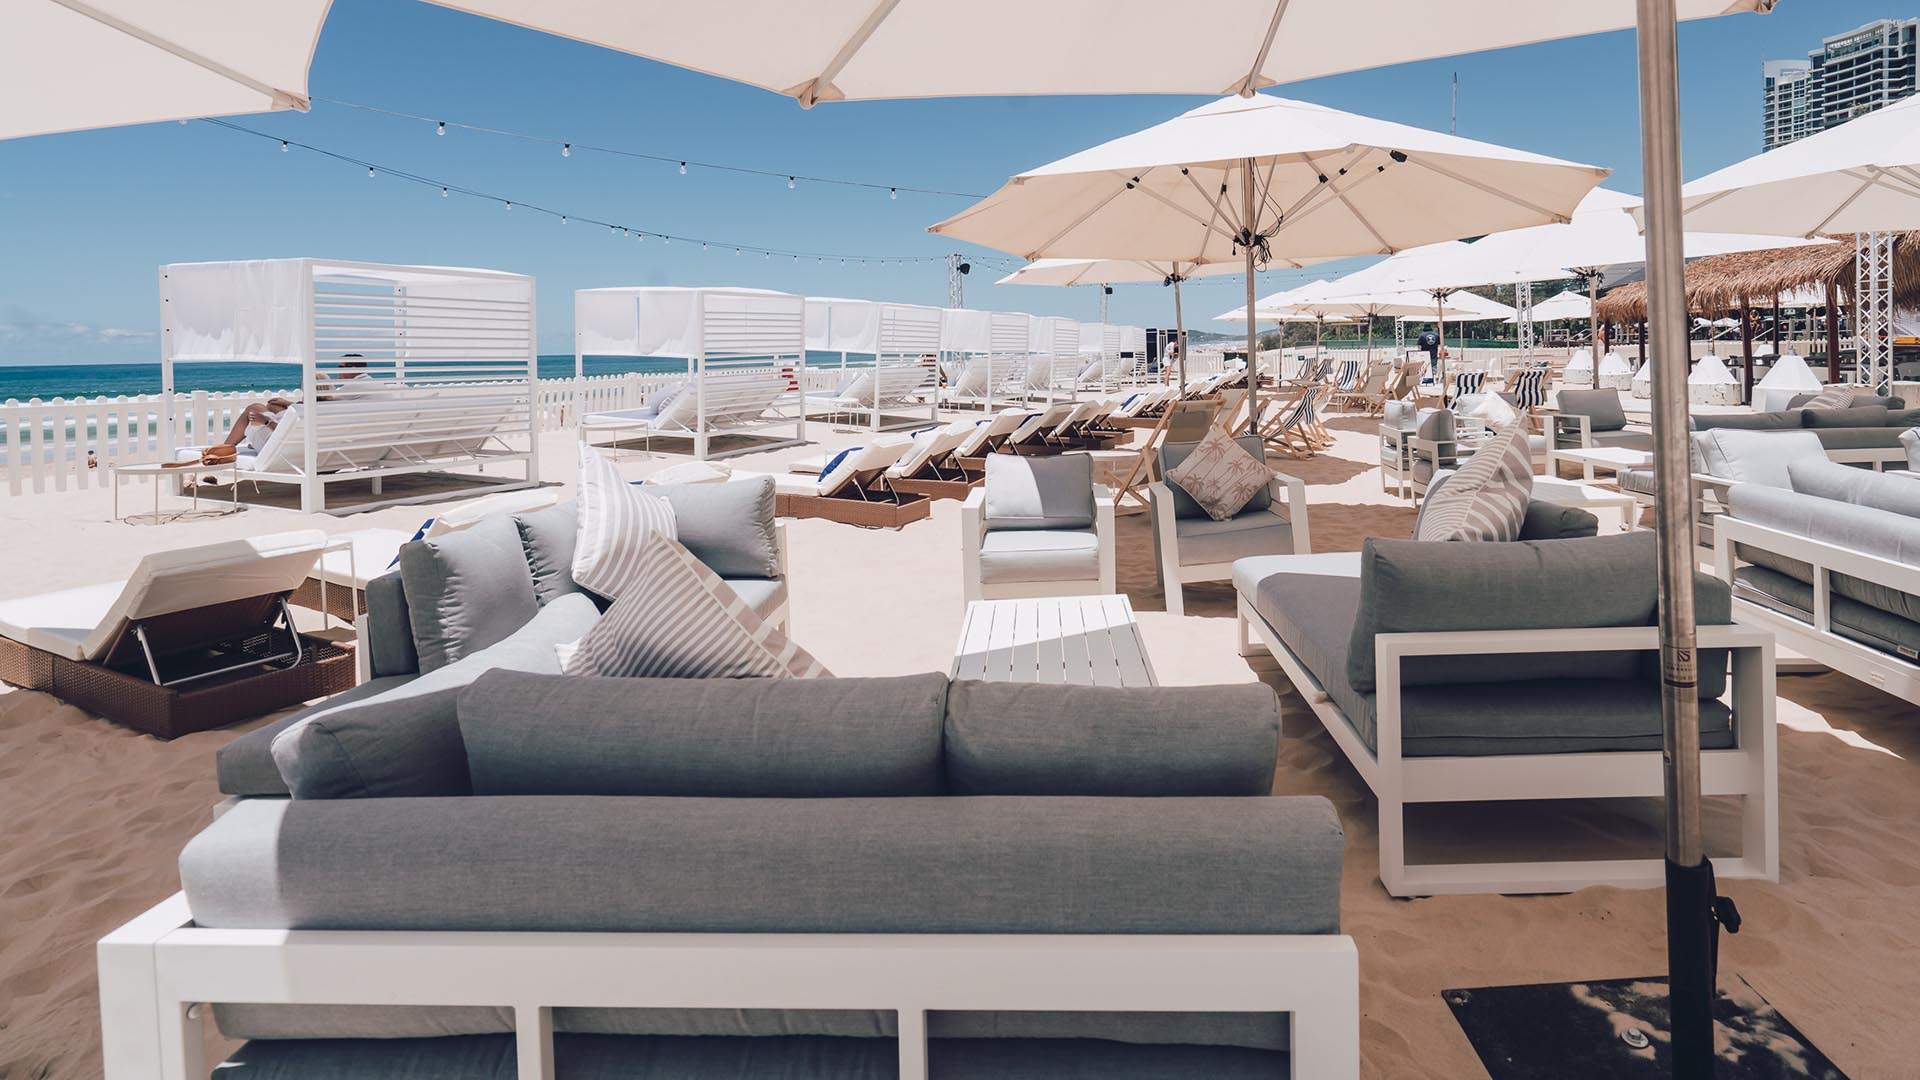 Kurrawa Beach Club Is Broadbeach's New Seaside Pop-Up with Cabanas, Daybeds and a Bar on the Sand